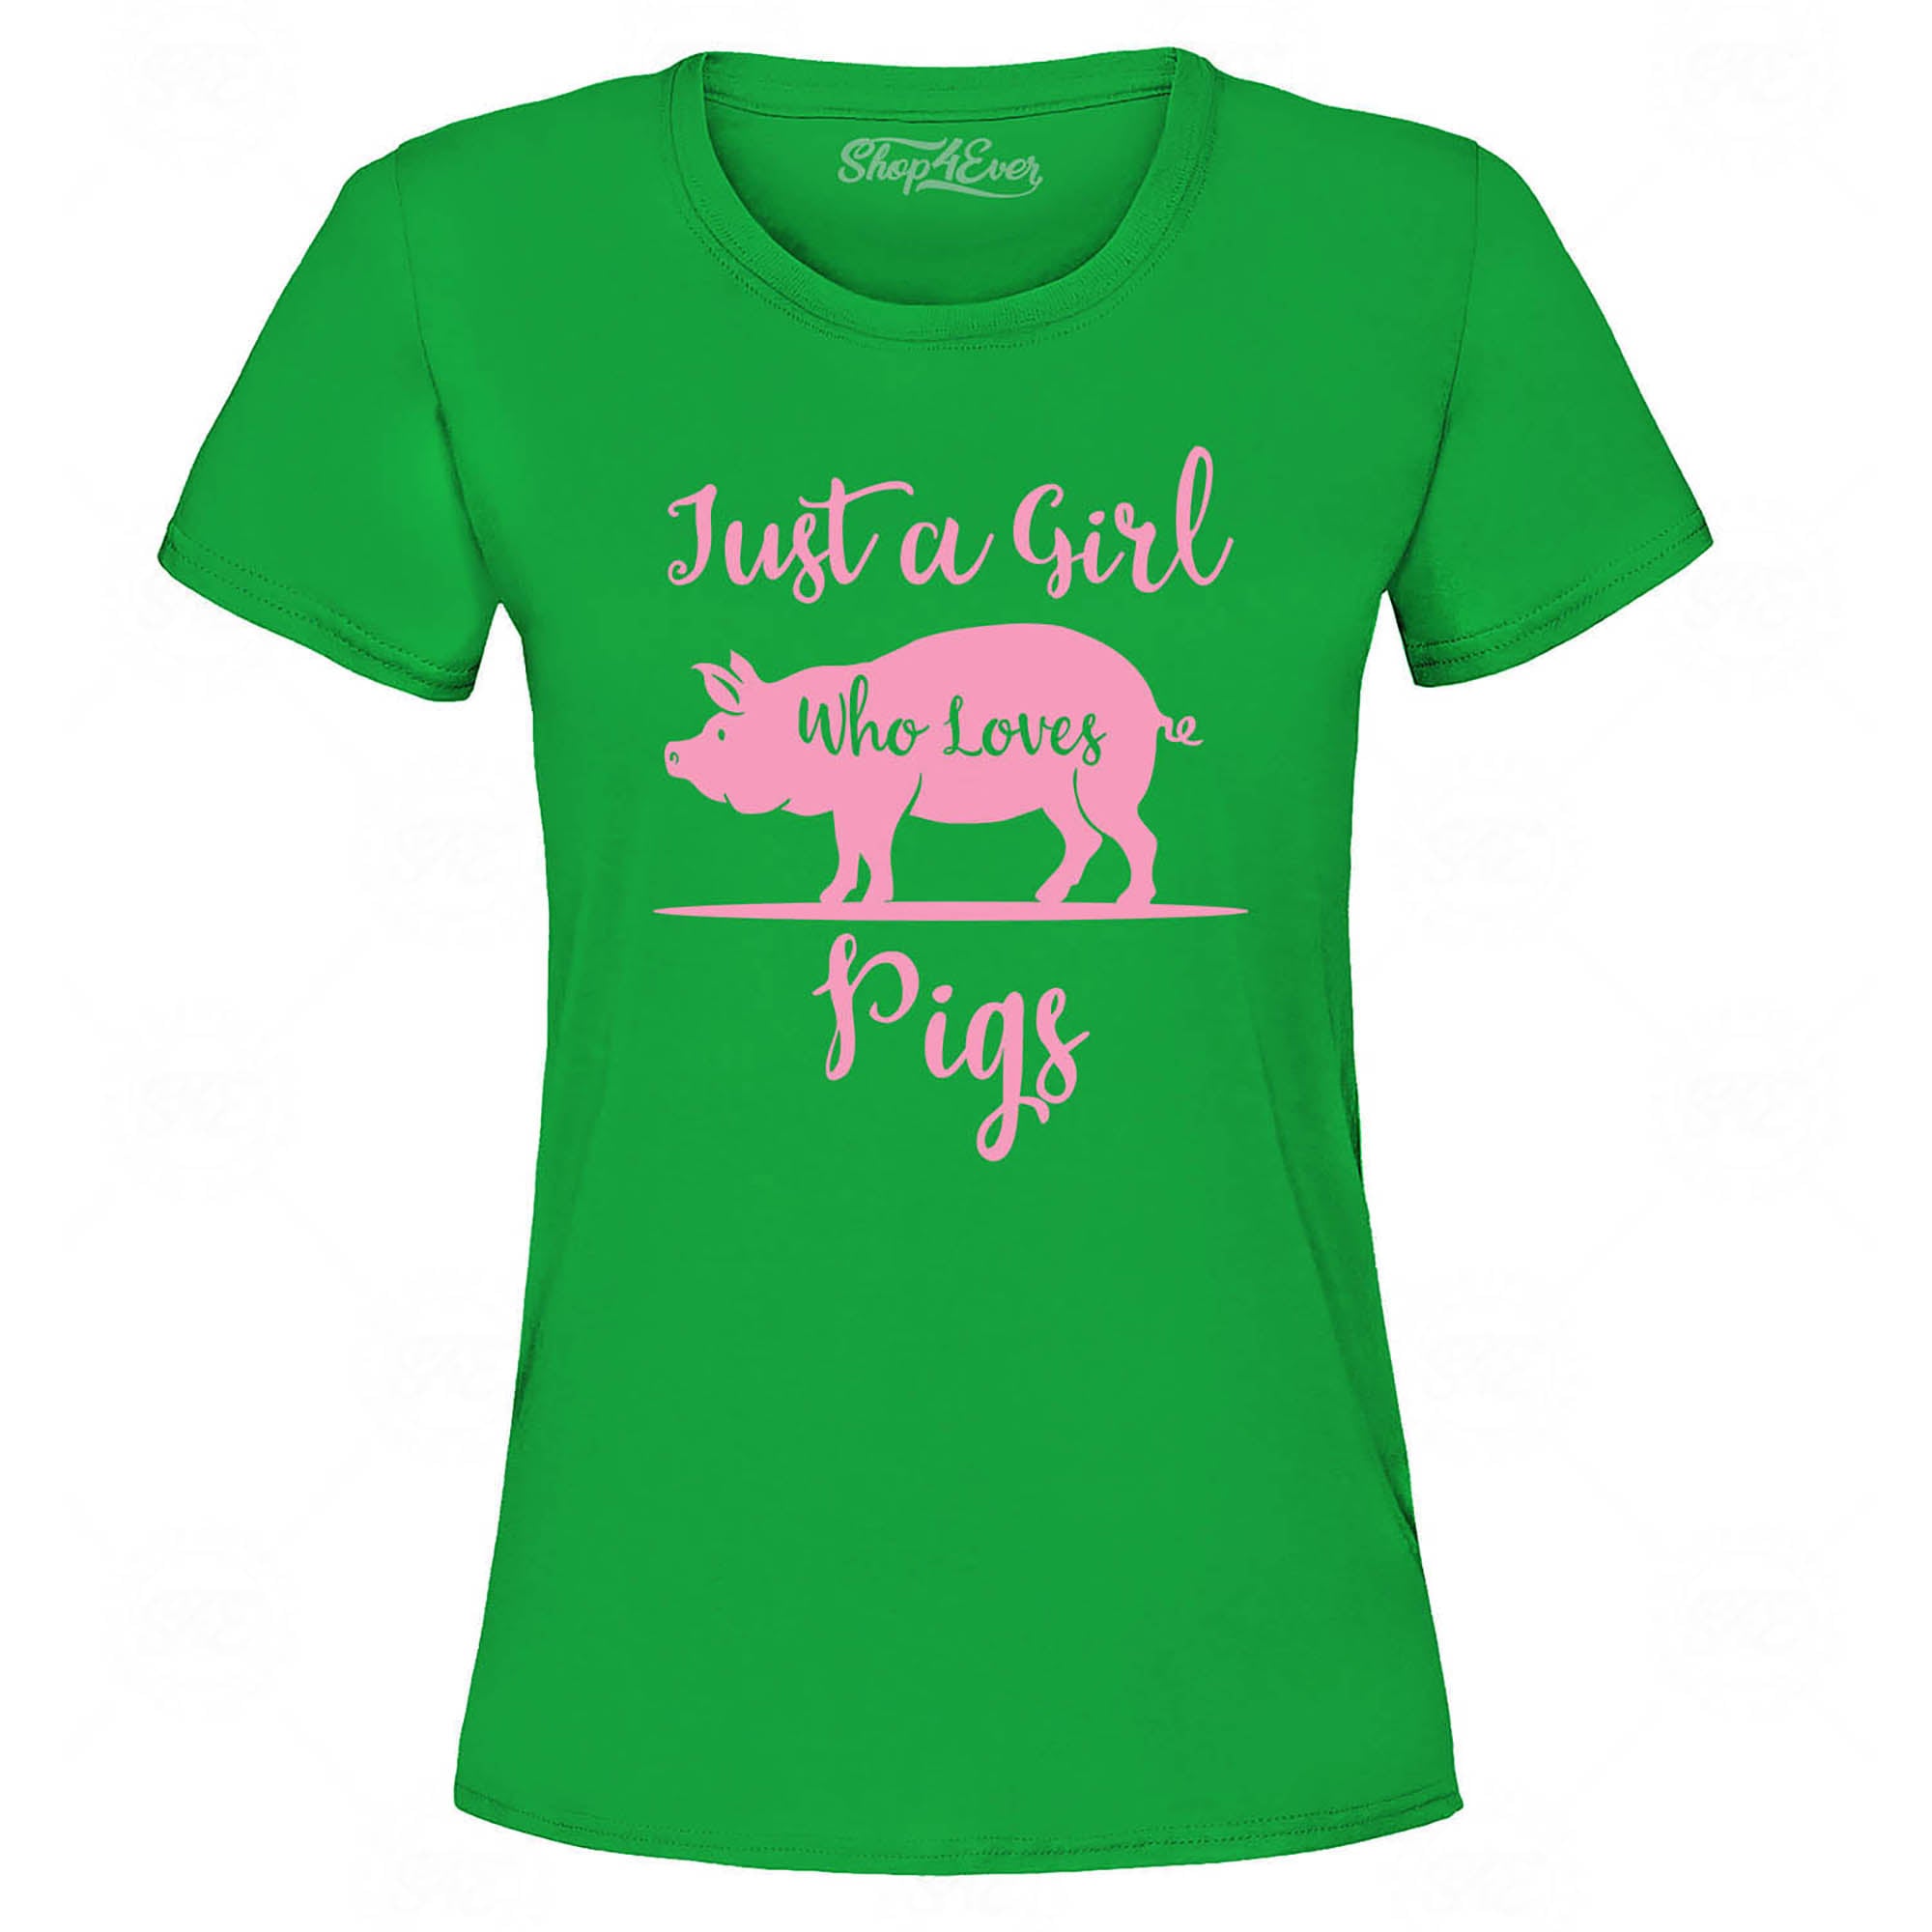 Just A Girl Who Loves Pigs Women's T-Shirt